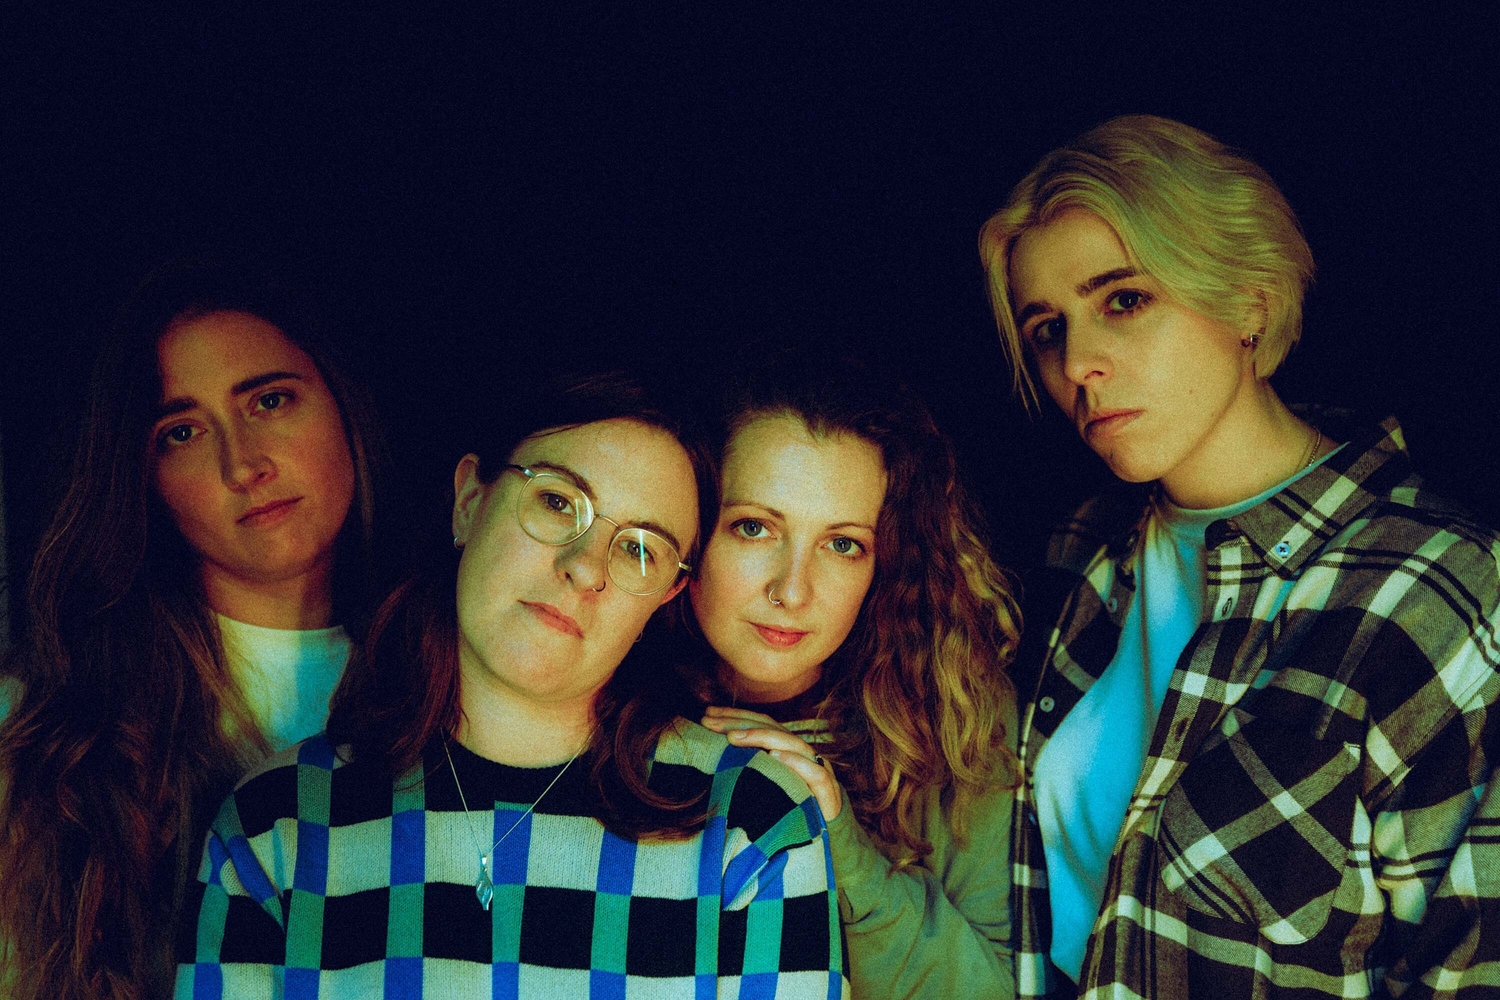 Pillow Queens on the thriving Irish scene, literary inspirations, and their vulnerable third album ‘Name Your Sorrow’